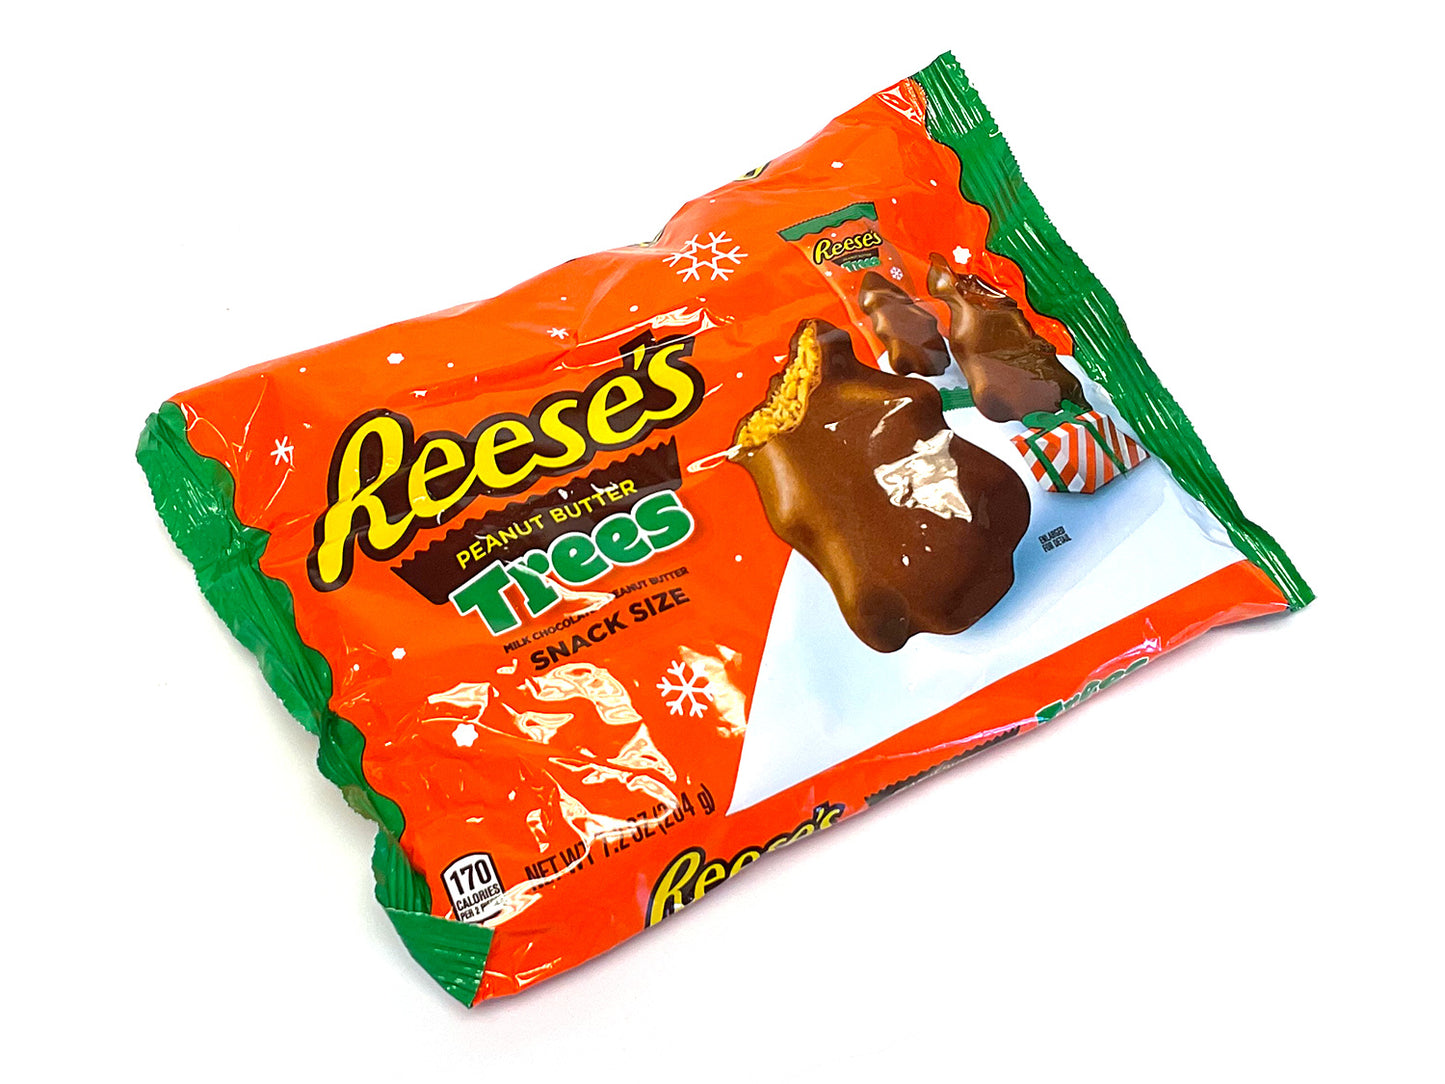 Reese's Peanut Butter Trees - Snack Size - 7.2 oz bag